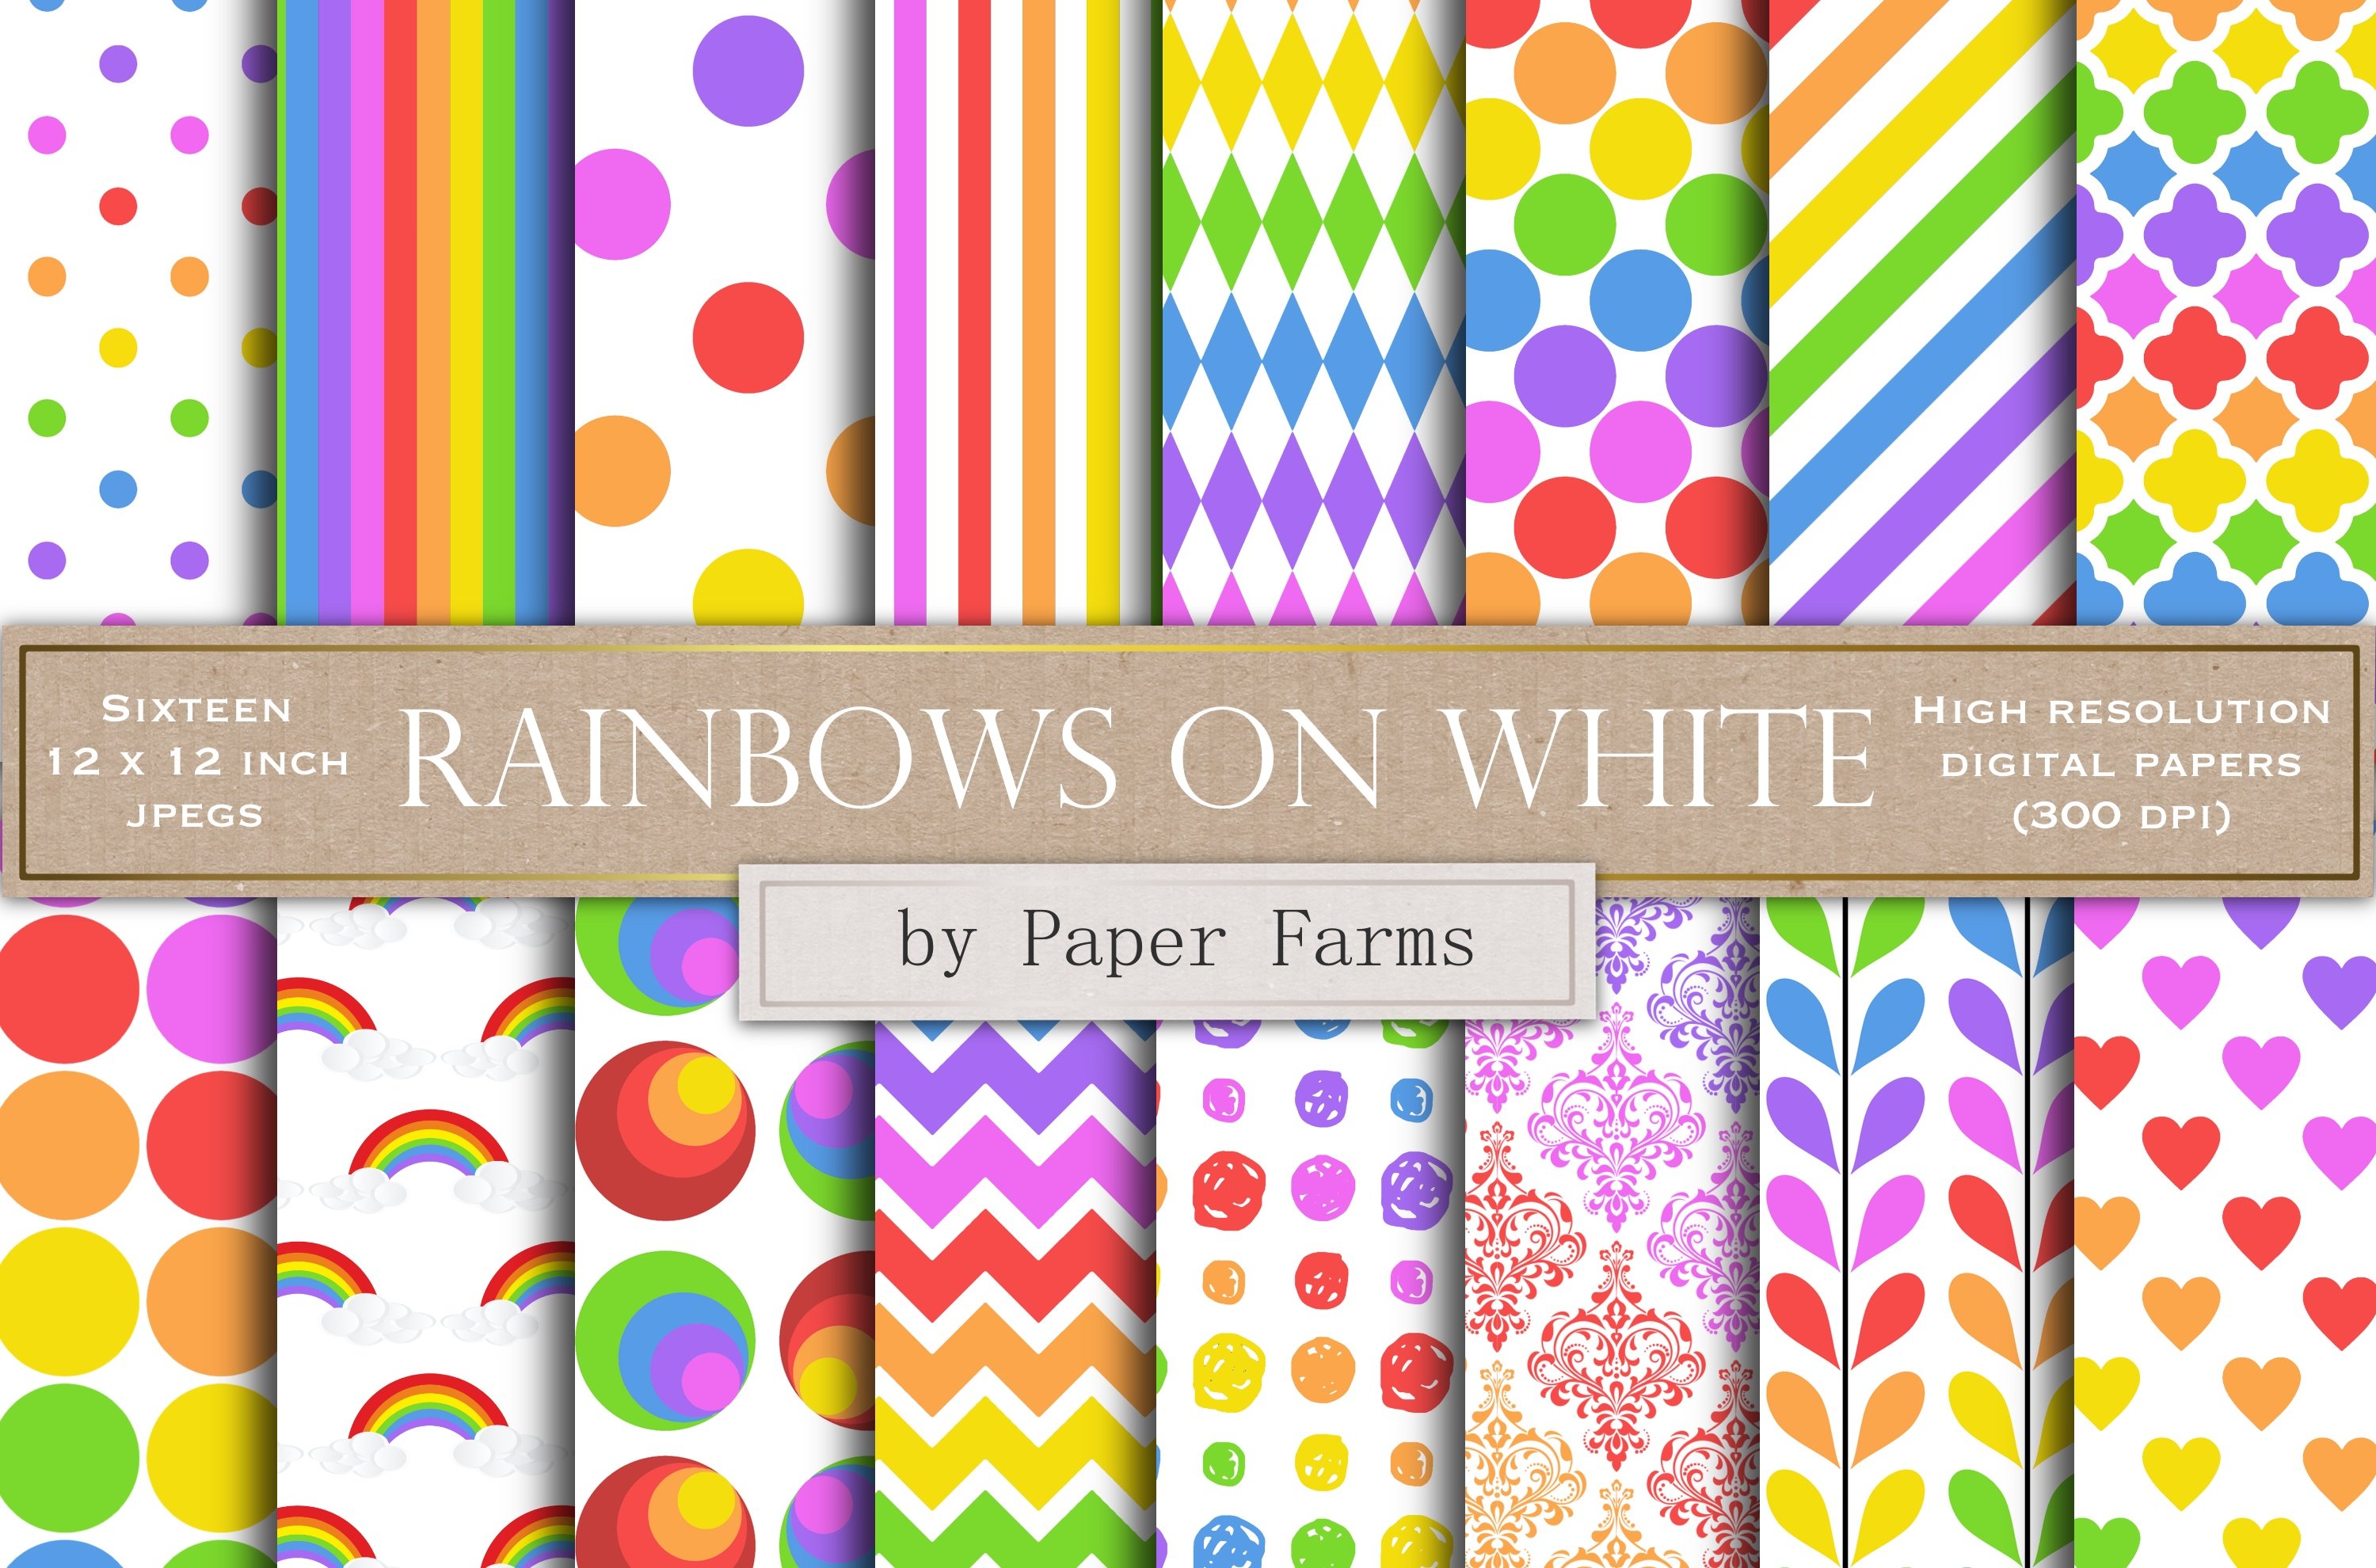 Rainbow patterns cover image.